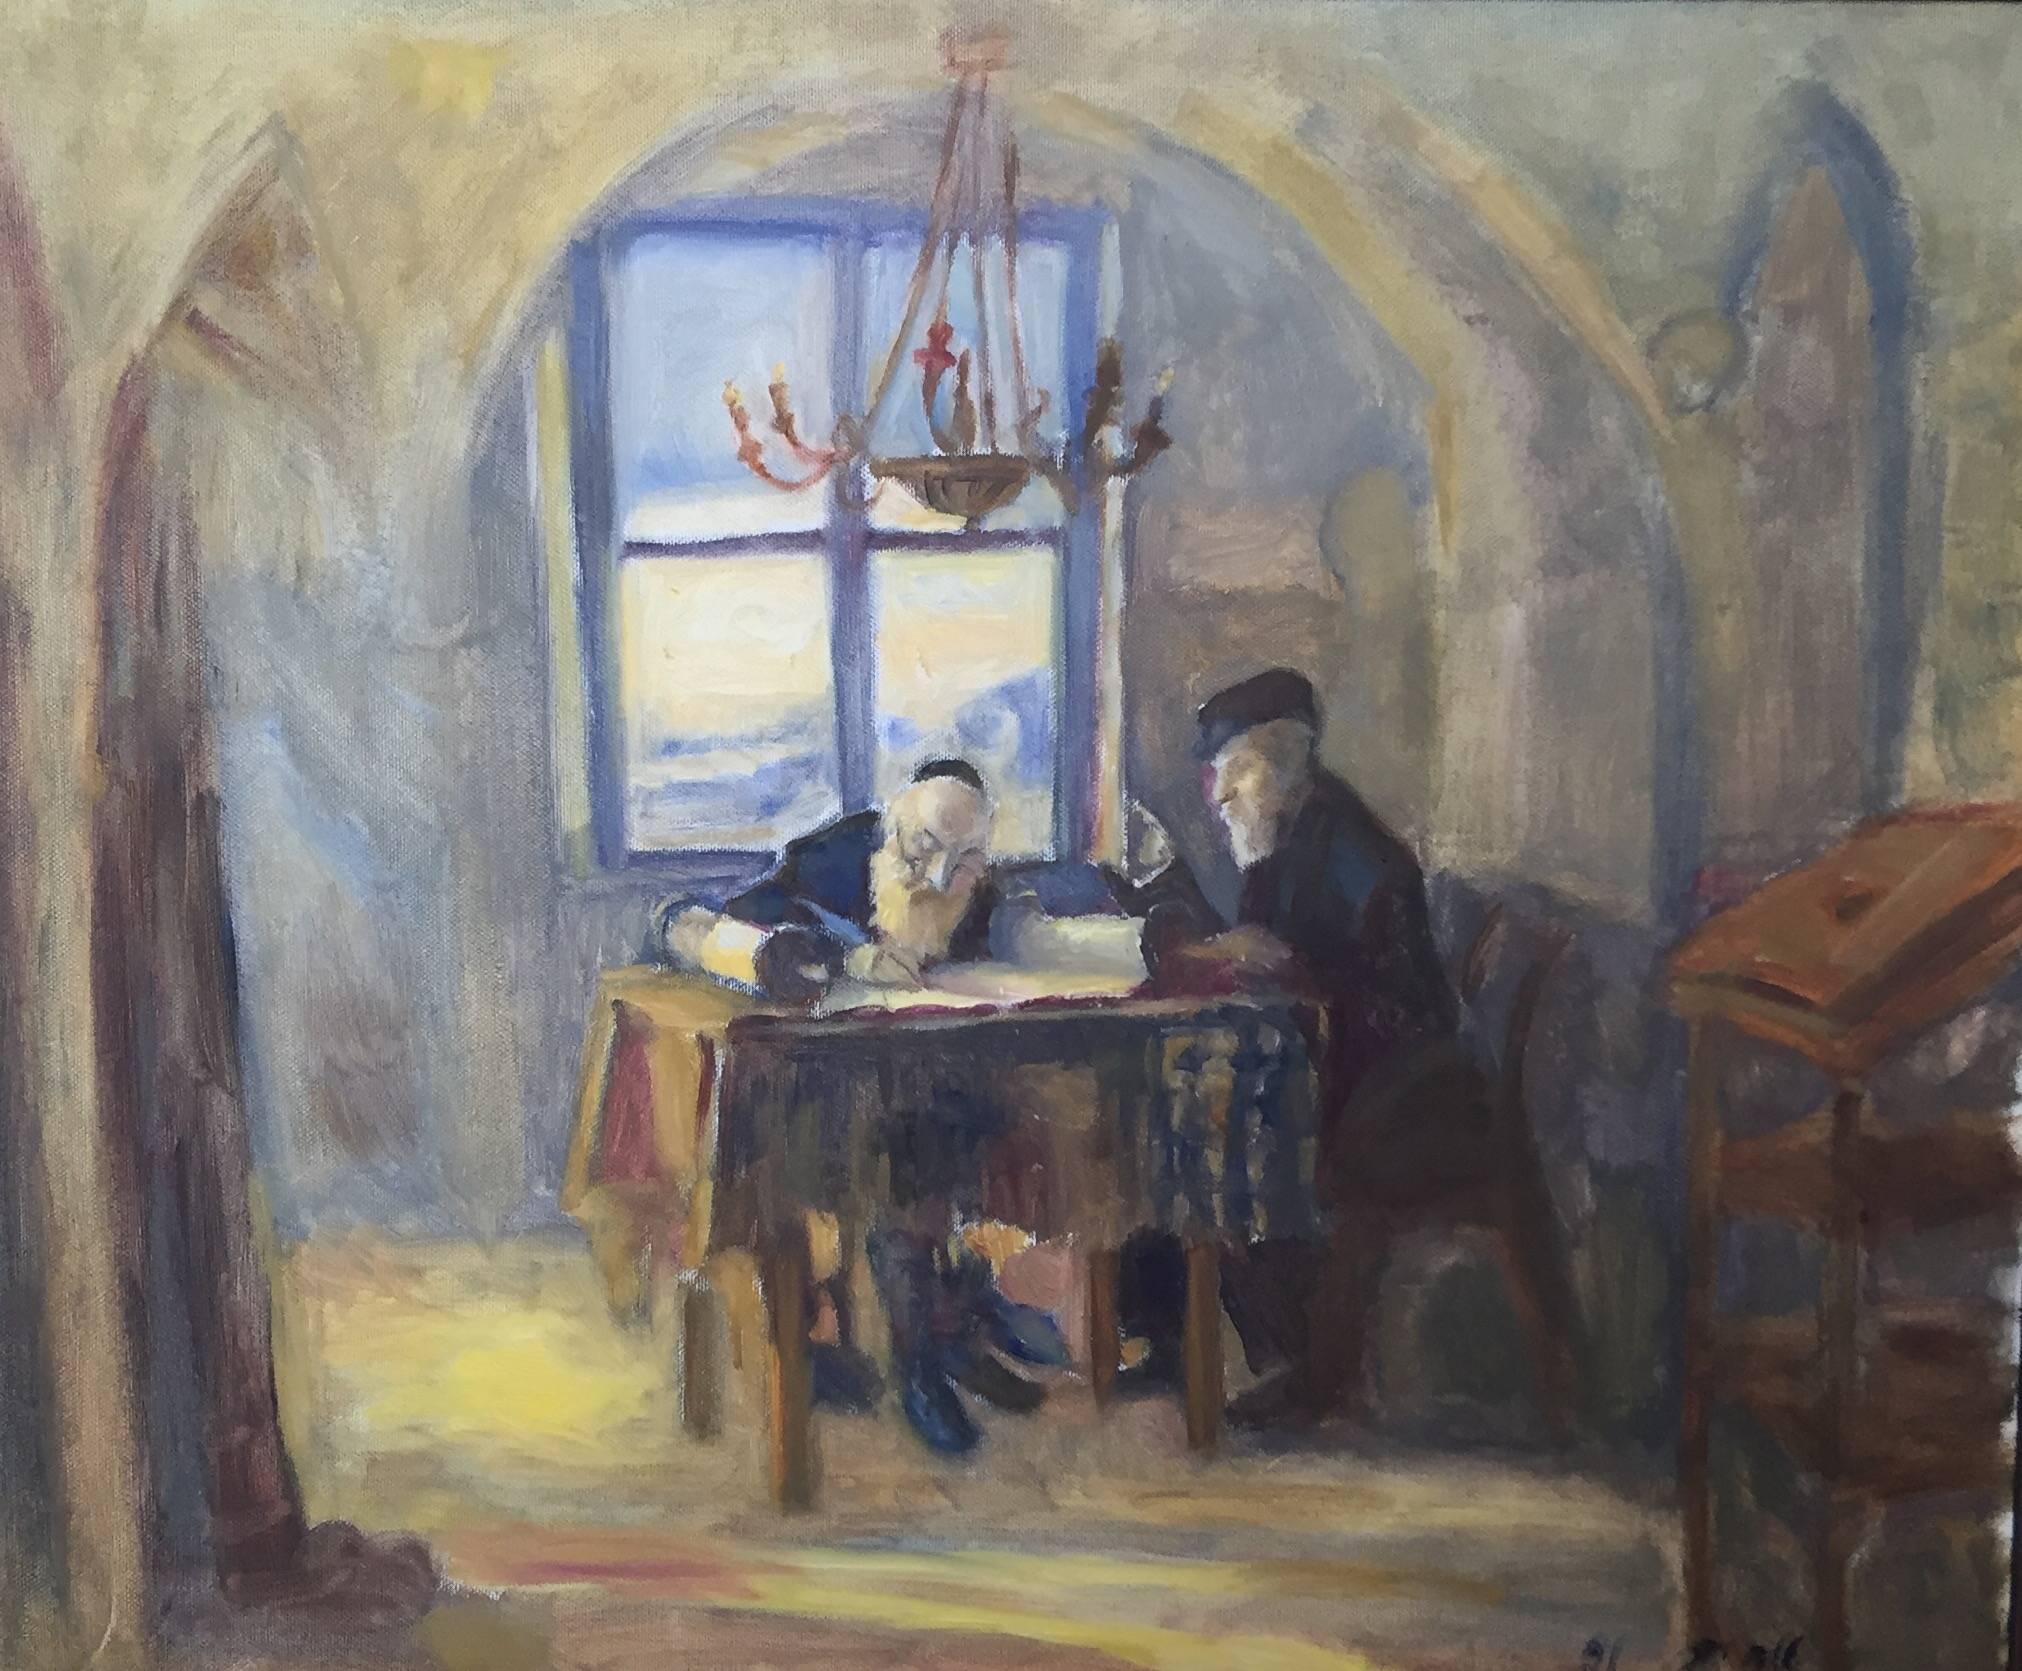 Scribe and Scholar, Judaic Oil on Canvas - Painting by Leonid Balaklav